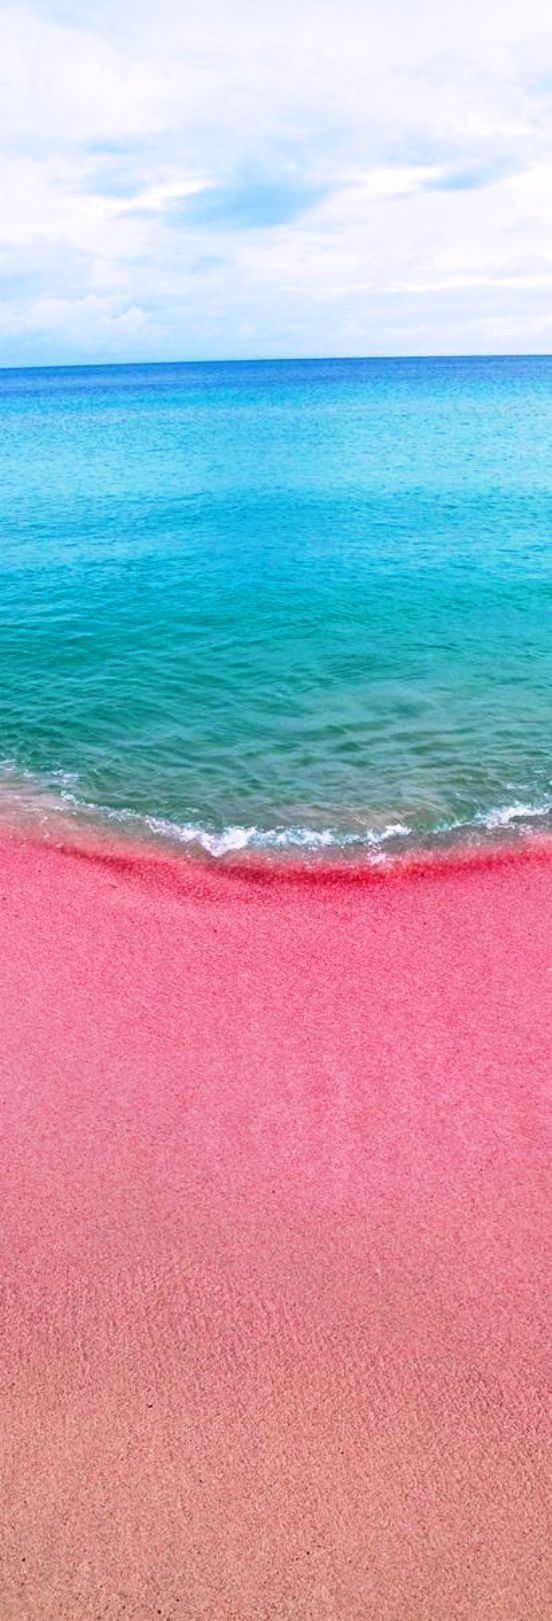 Pink Sand Beach, Bahamas. ITS A THING!! I have a pink sands air freshener in my car and people always make fun of it…Its real